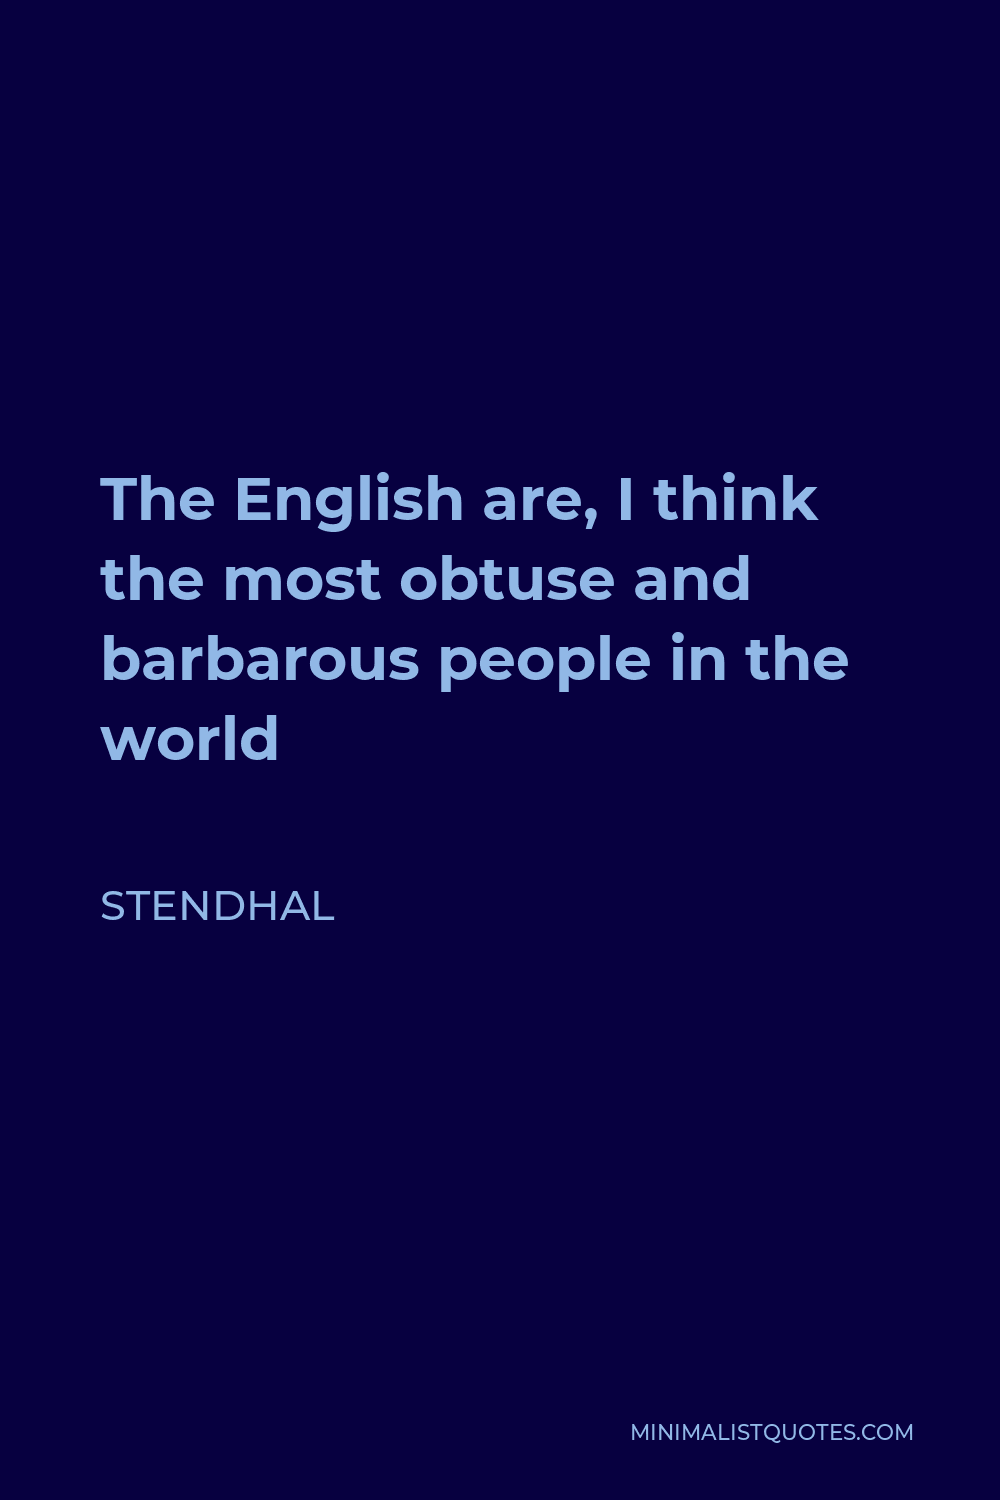 Stendhal Quote - The English are, I think the most obtuse and barbarous people in the world